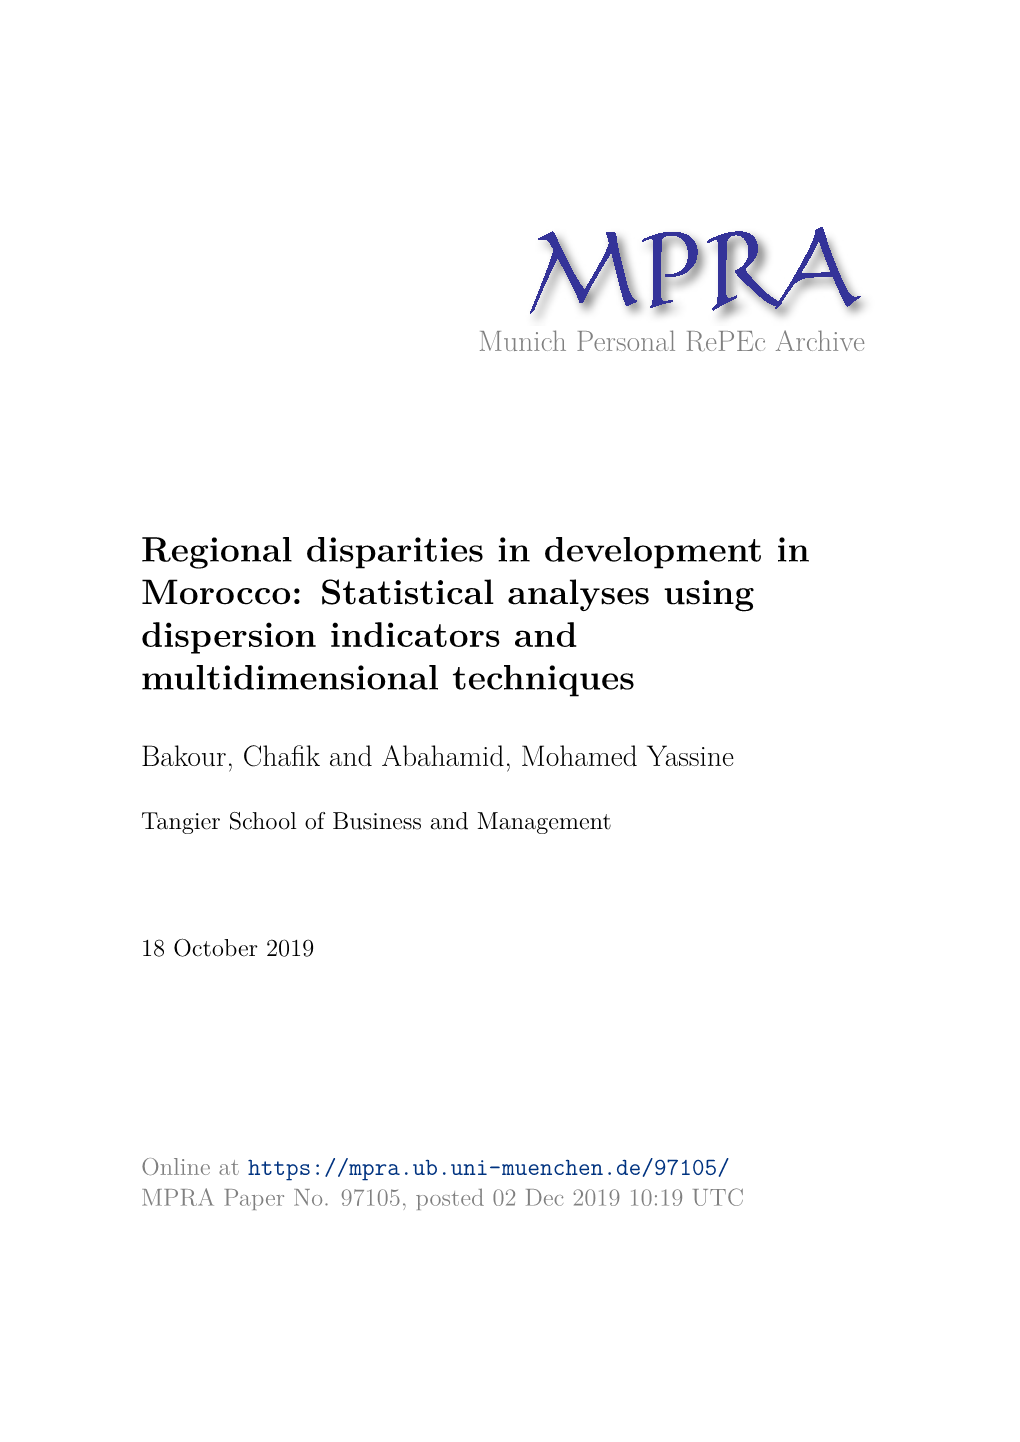 Regional Disparities in Development in Morocco: Statistical Analyses Using Dispersion Indicators and Multidimensional Techniques